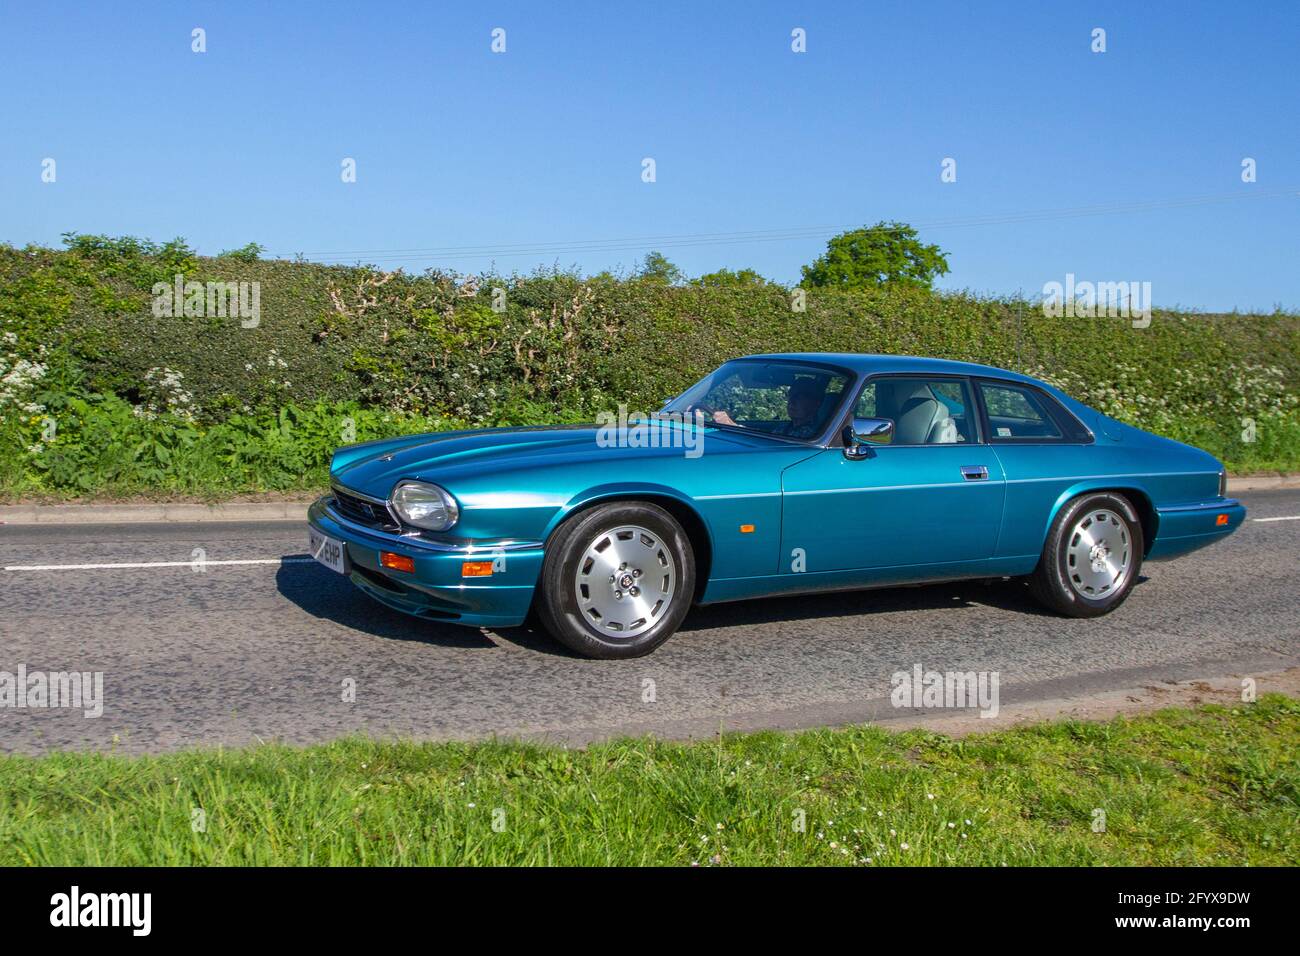 2012 Jaguar Xj-S 4.0 auto, Vehicular traffic, moving vehicles, cars, vehicle driving on UK roads, motors, motoring  en-route to Capesthorne Hall classic May car show, Cheshire, UK Stock Photo